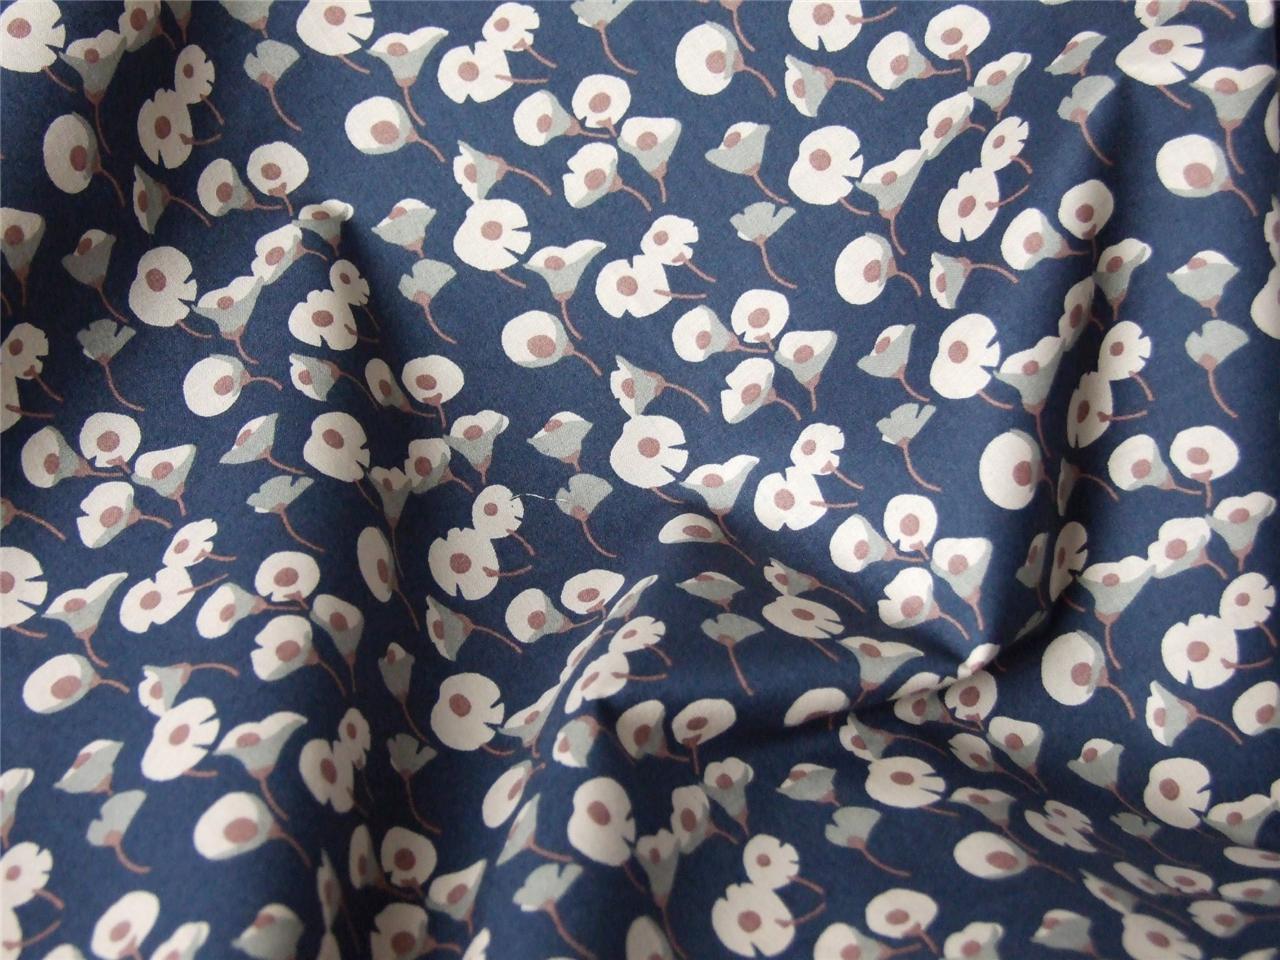 Navy Blue Classy Floral 100% COTTON LAWN fine quality FABRIC for dress making